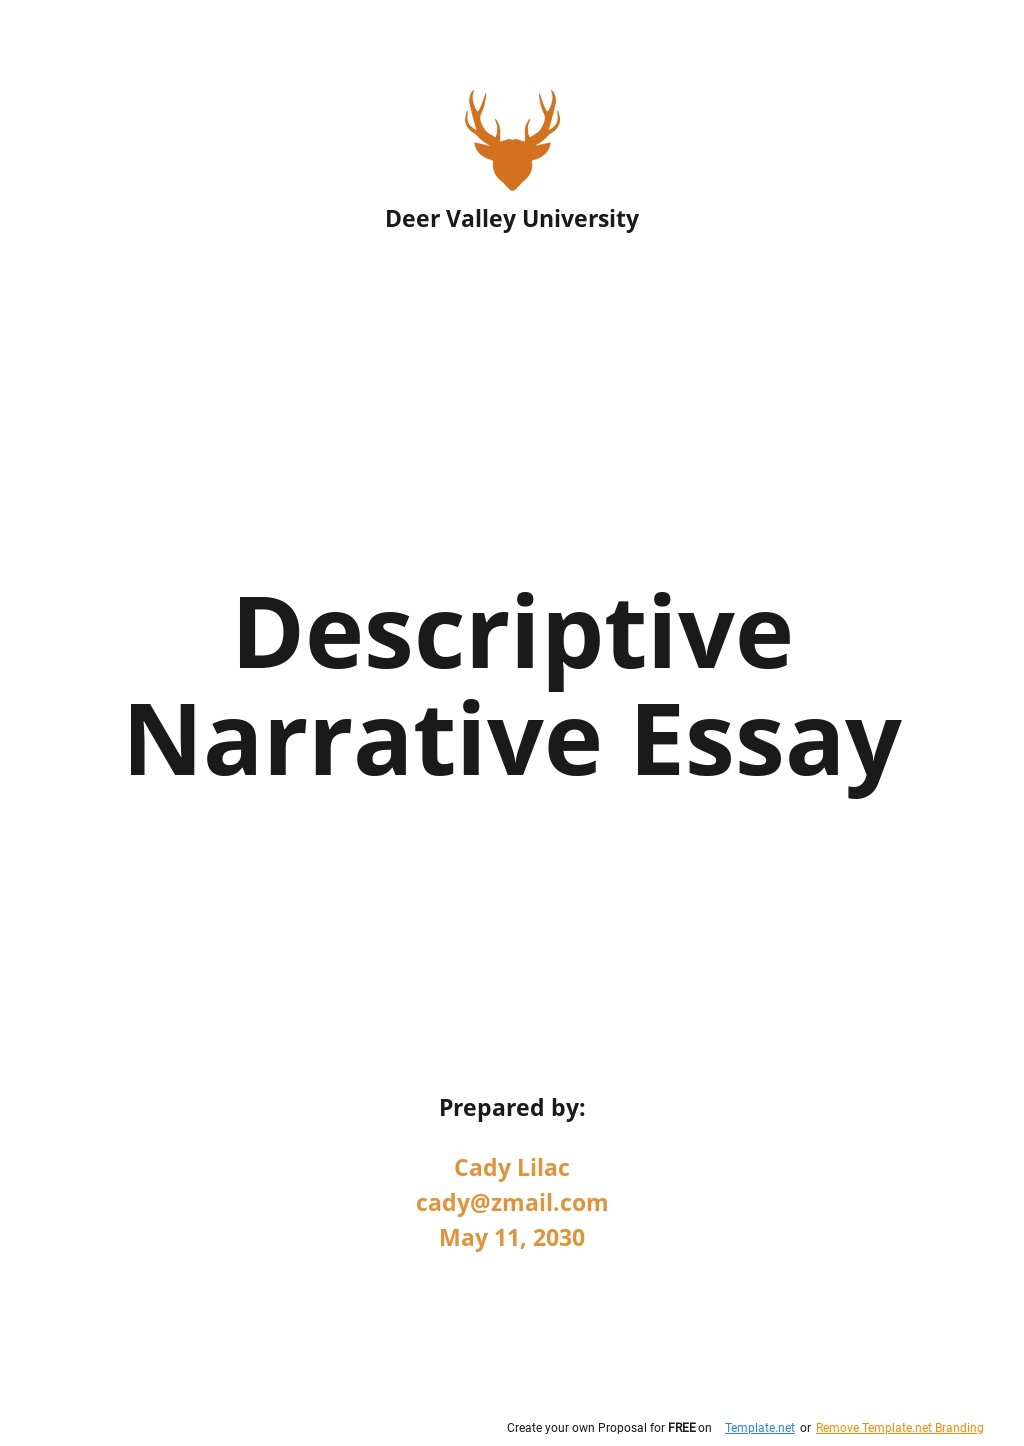 Free Descriptive Narrative Essay Template in Word, Google Docs, Apple Pages